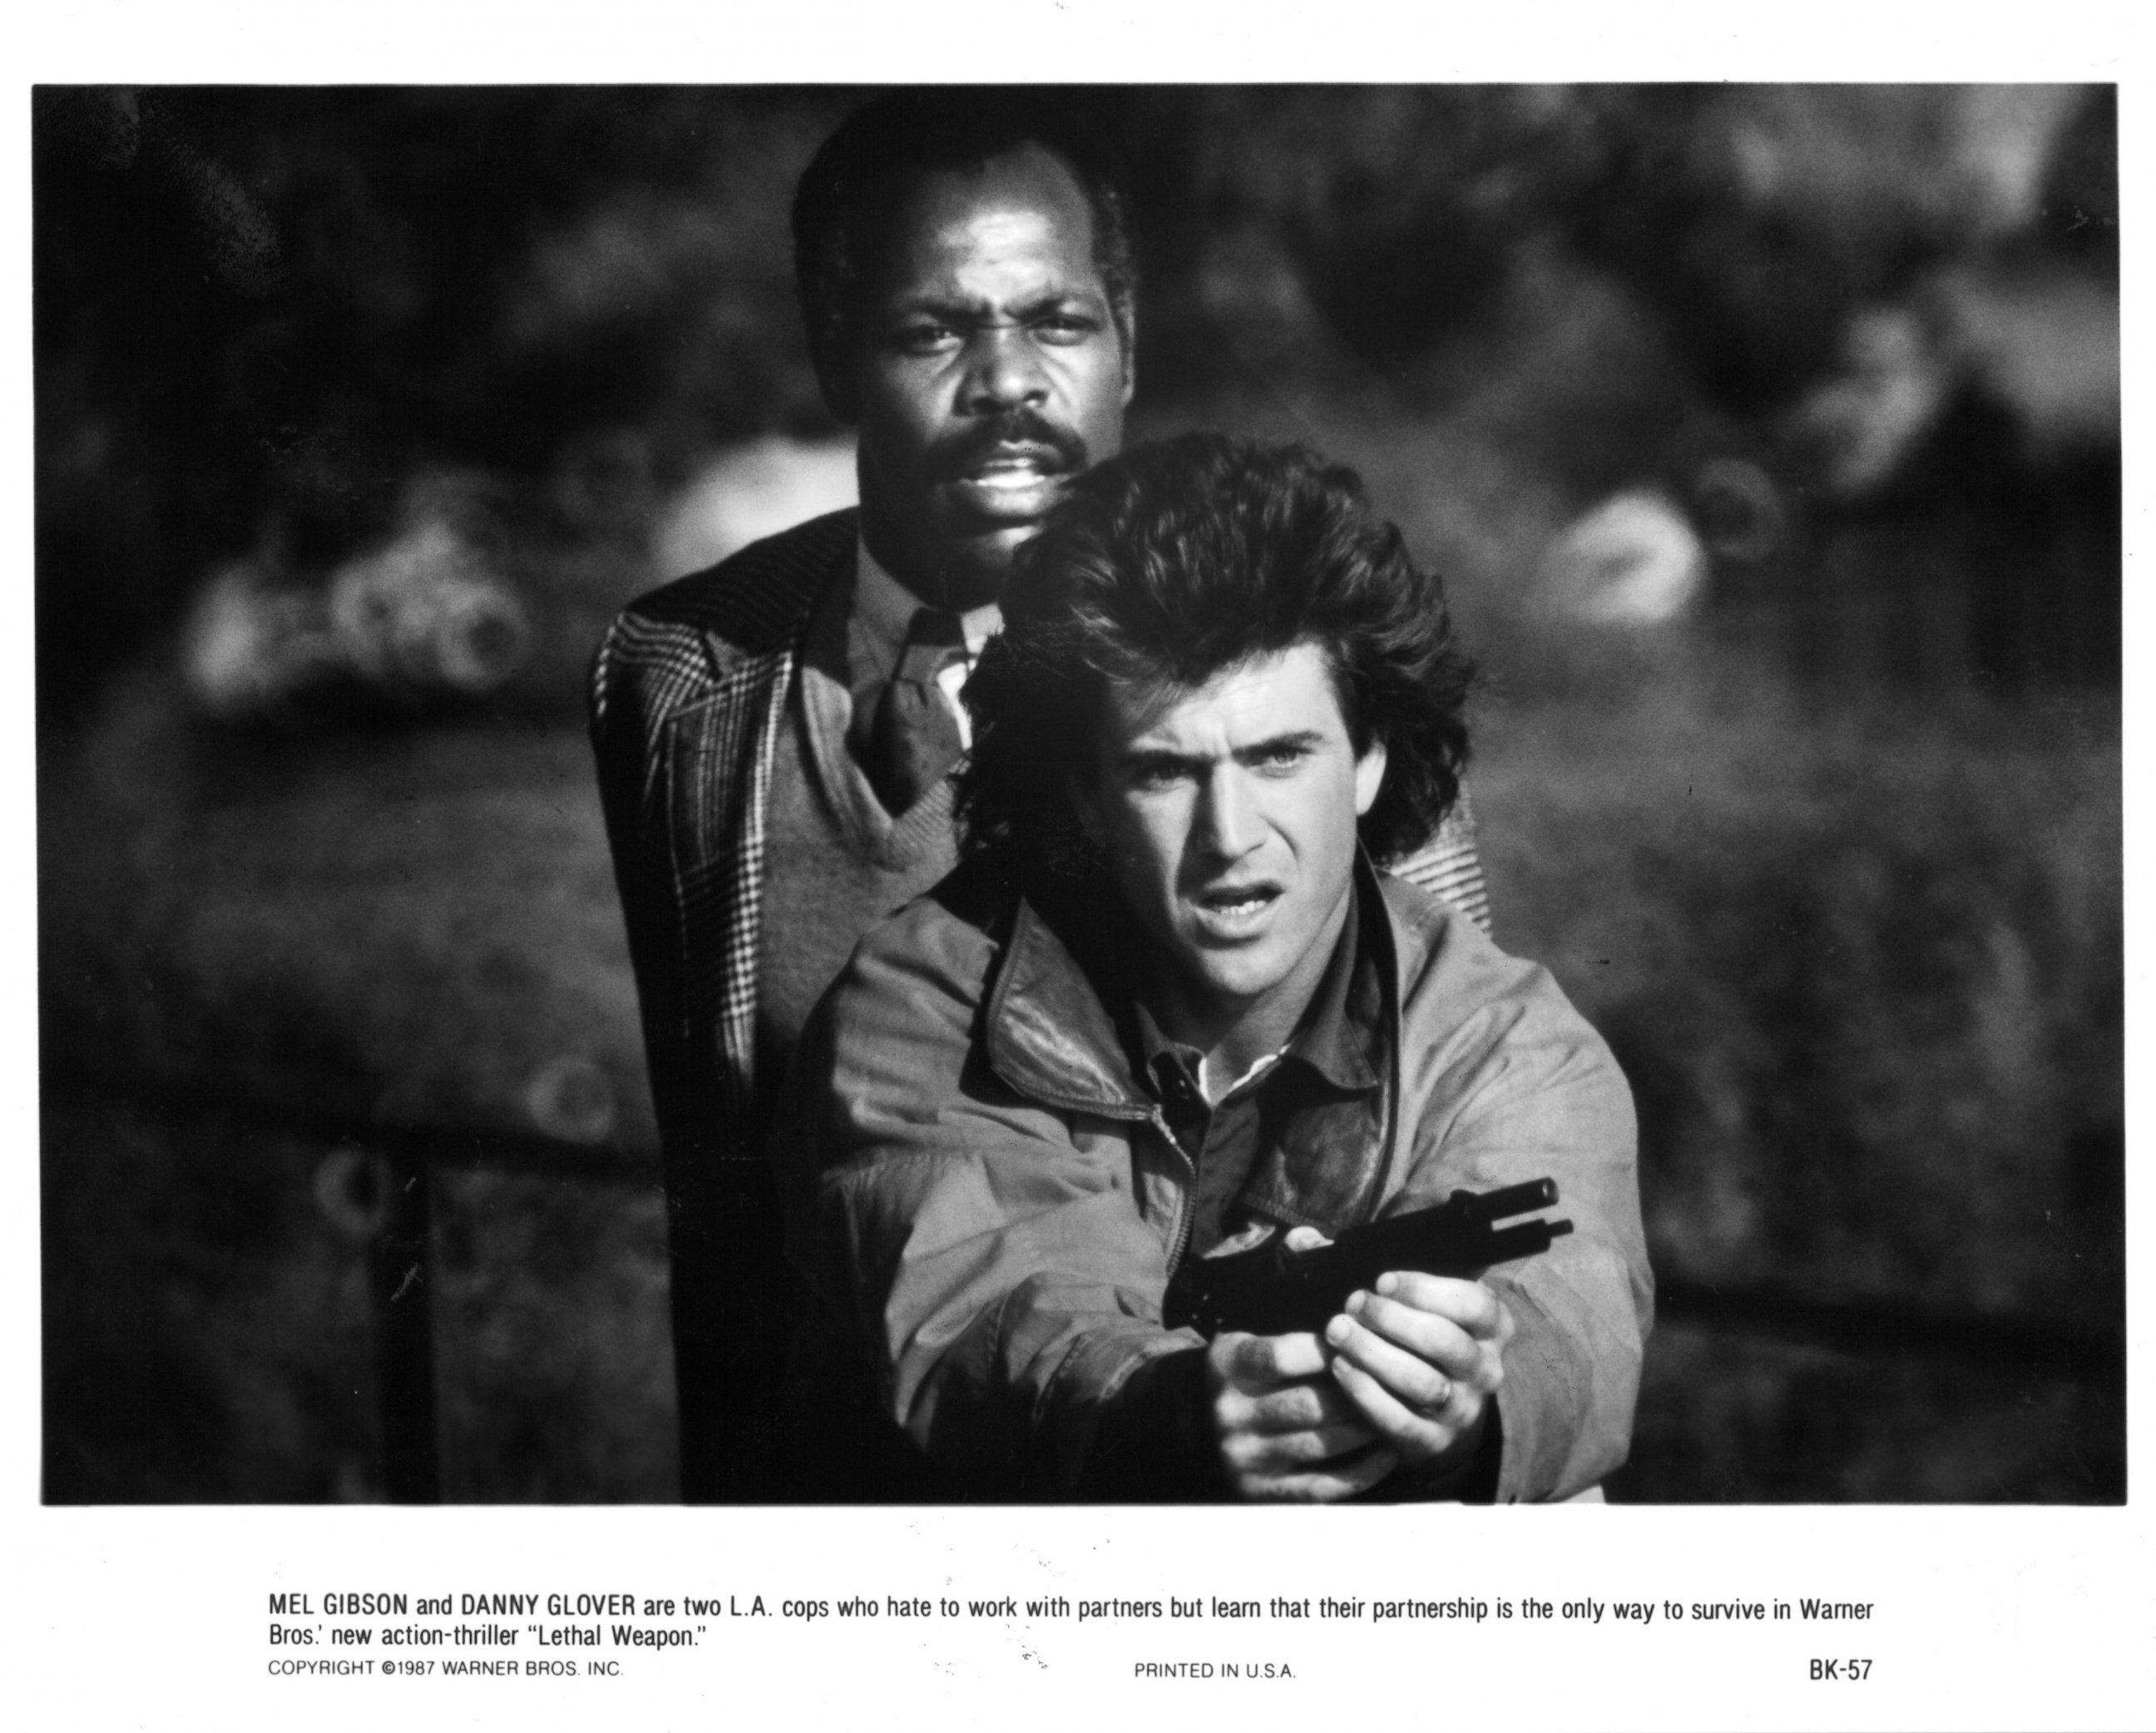 PHOTO: Danny Glover stands behind Mel Gibson in a scene from the film "Lethal Weapon," 1987. 